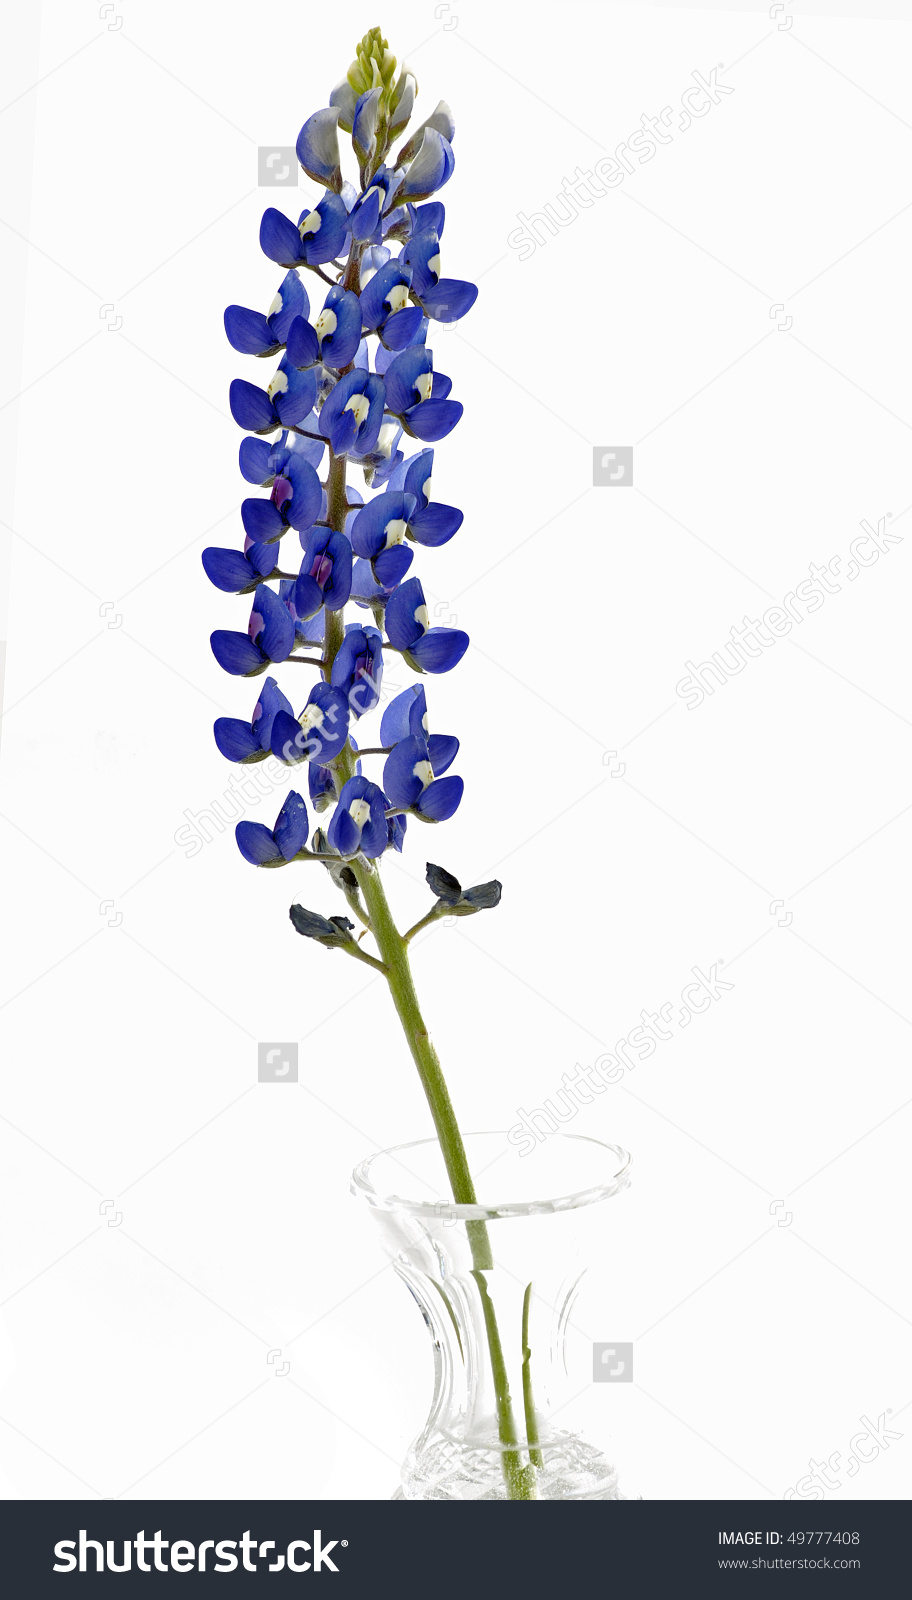 Texas Bluebonnets clipart #13, Download drawings